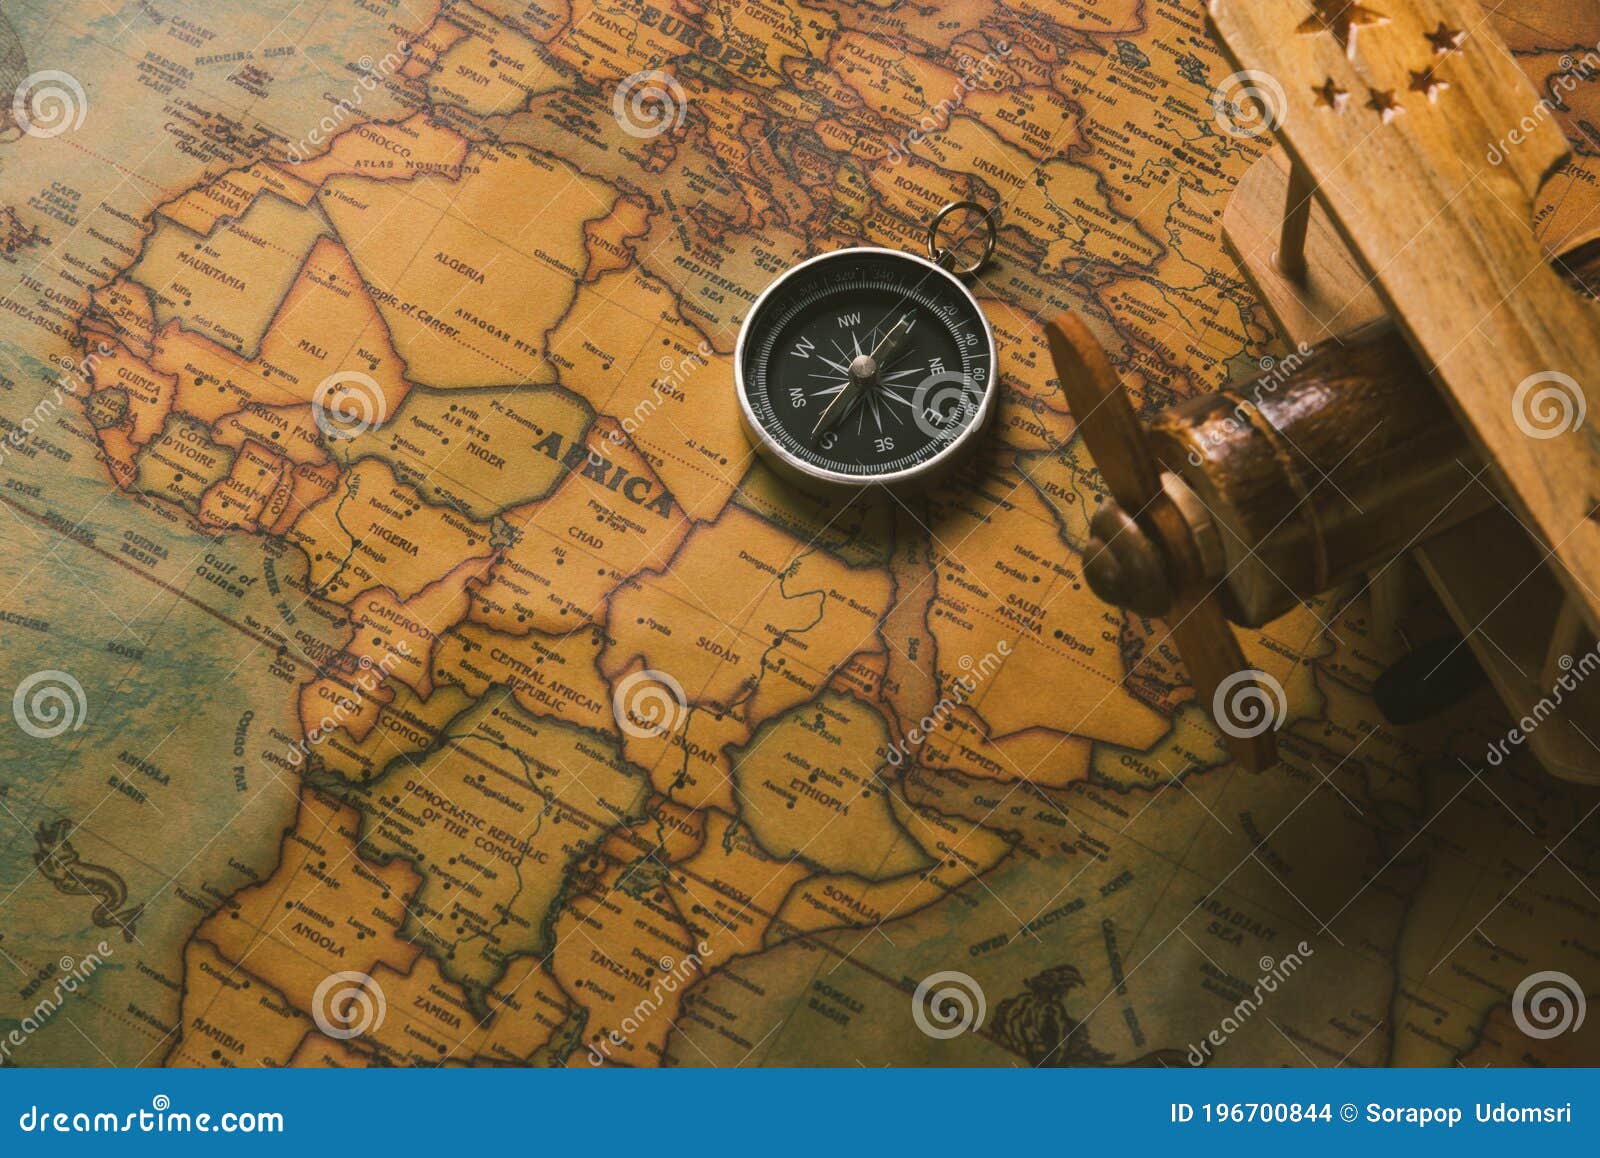 Old Compass Discovery and Wooden Plane on Vintage Paper Antique World Map  Stock Photo - Image of compass, history: 196700844